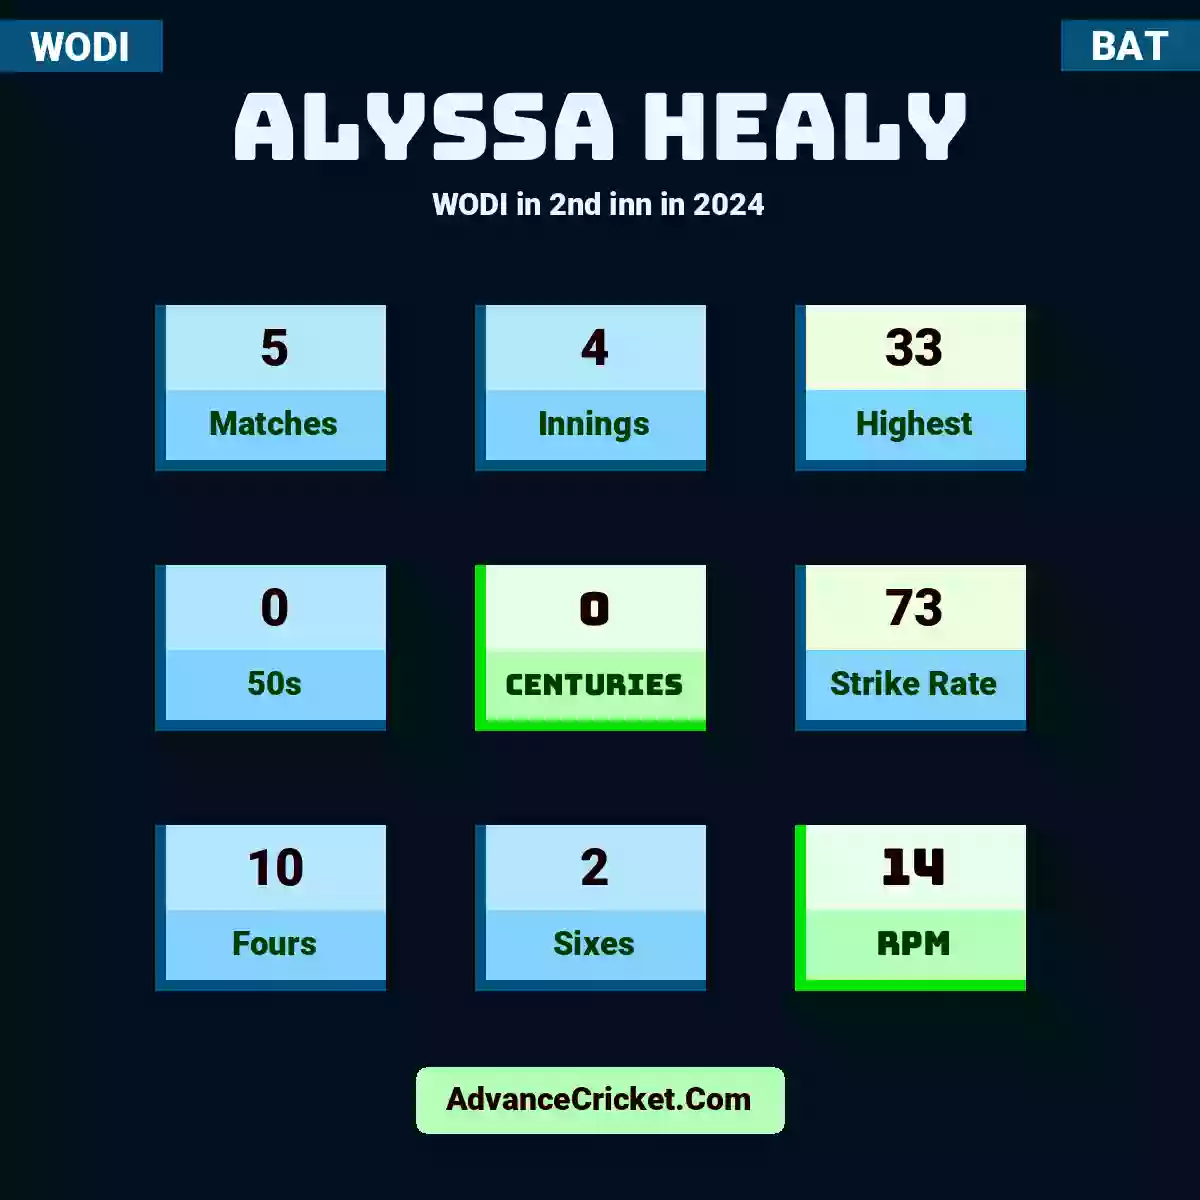 Alyssa Healy WODI  in 2nd inn in 2024, Alyssa Healy played 5 matches, scored 33 runs as highest, 0 half-centuries, and 0 centuries, with a strike rate of 73. A.Healy hit 10 fours and 2 sixes, with an RPM of 14.